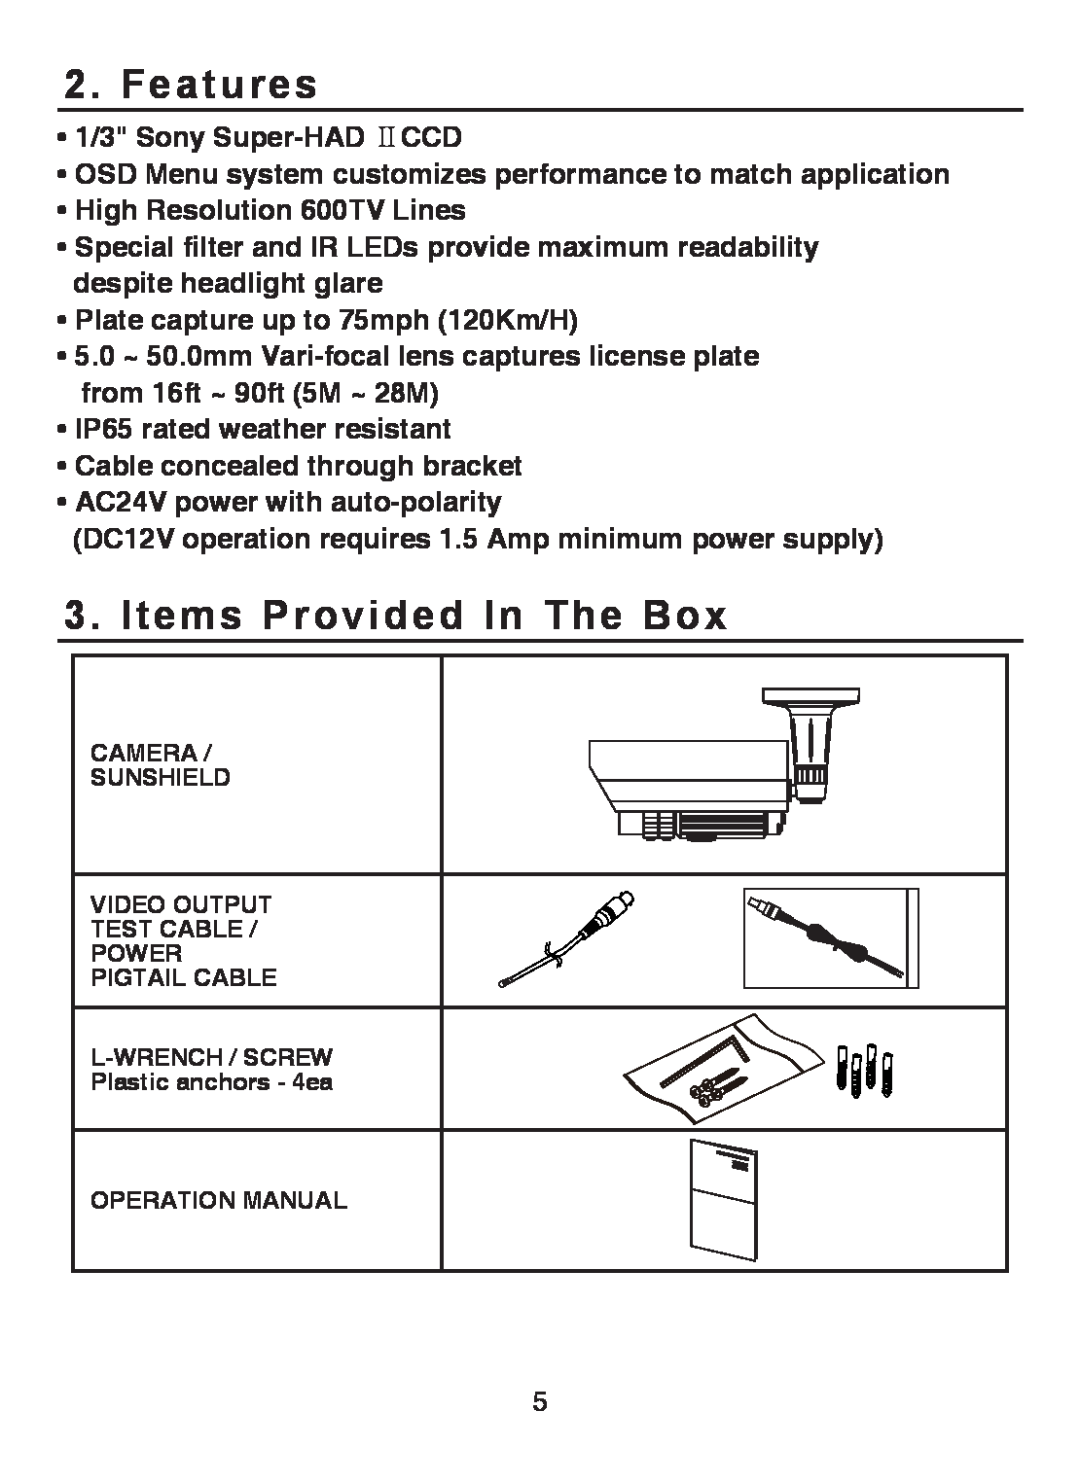 EverFocus EZ-PLATECAM2 operation manual Features, Items Provided In The Box 